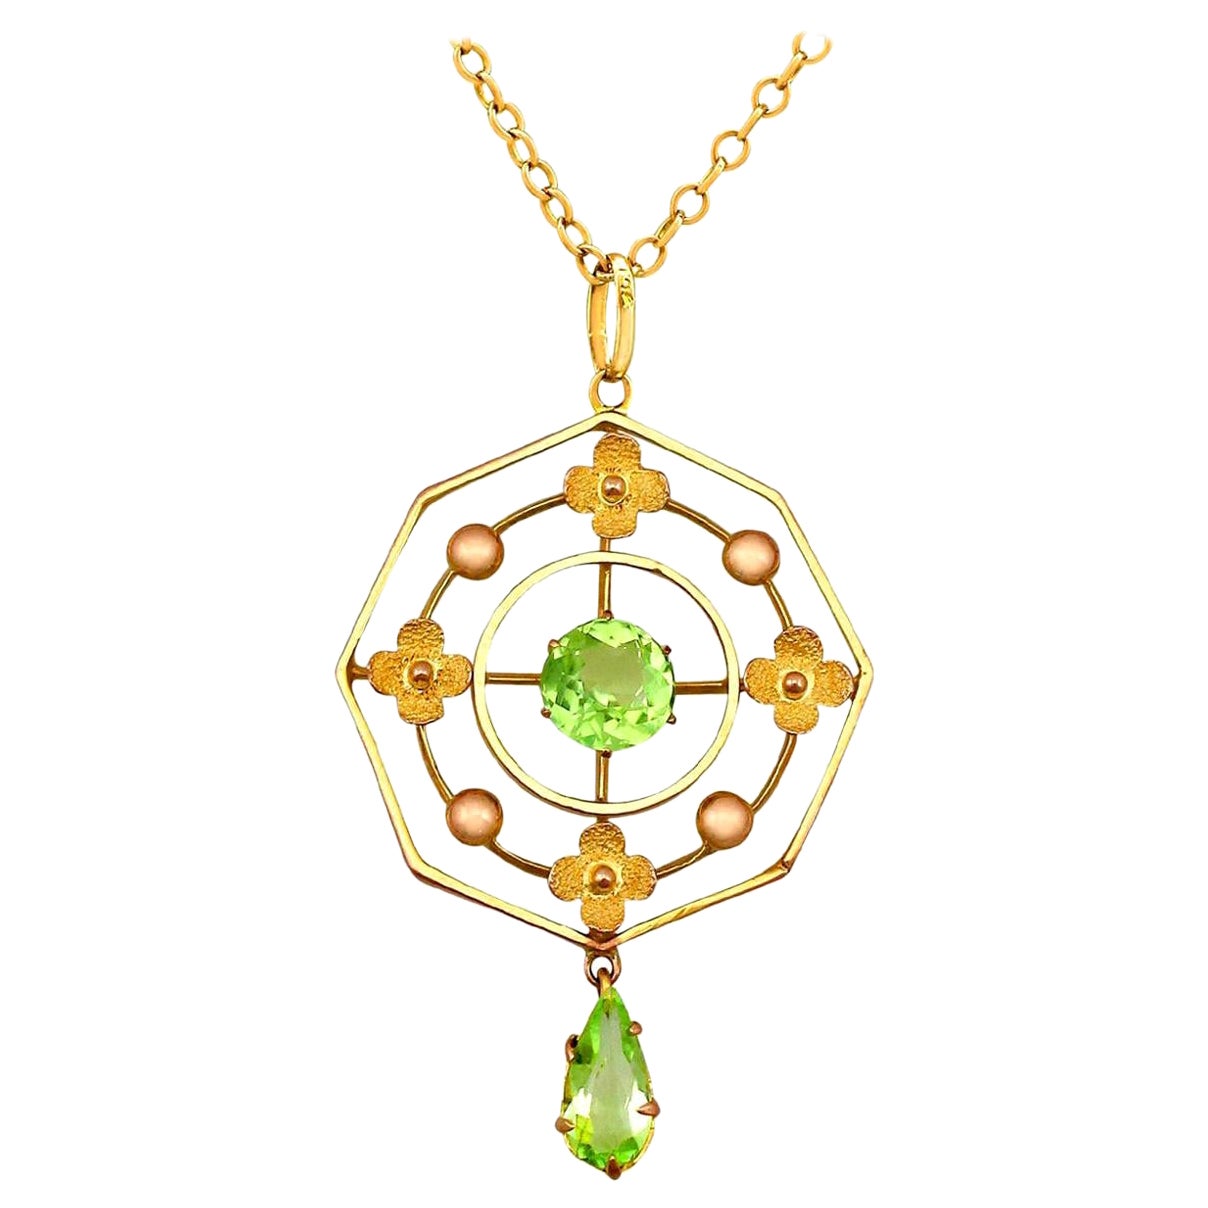 1930s Antique 1.15 Carat Peridot and Yellow Gold Pendant